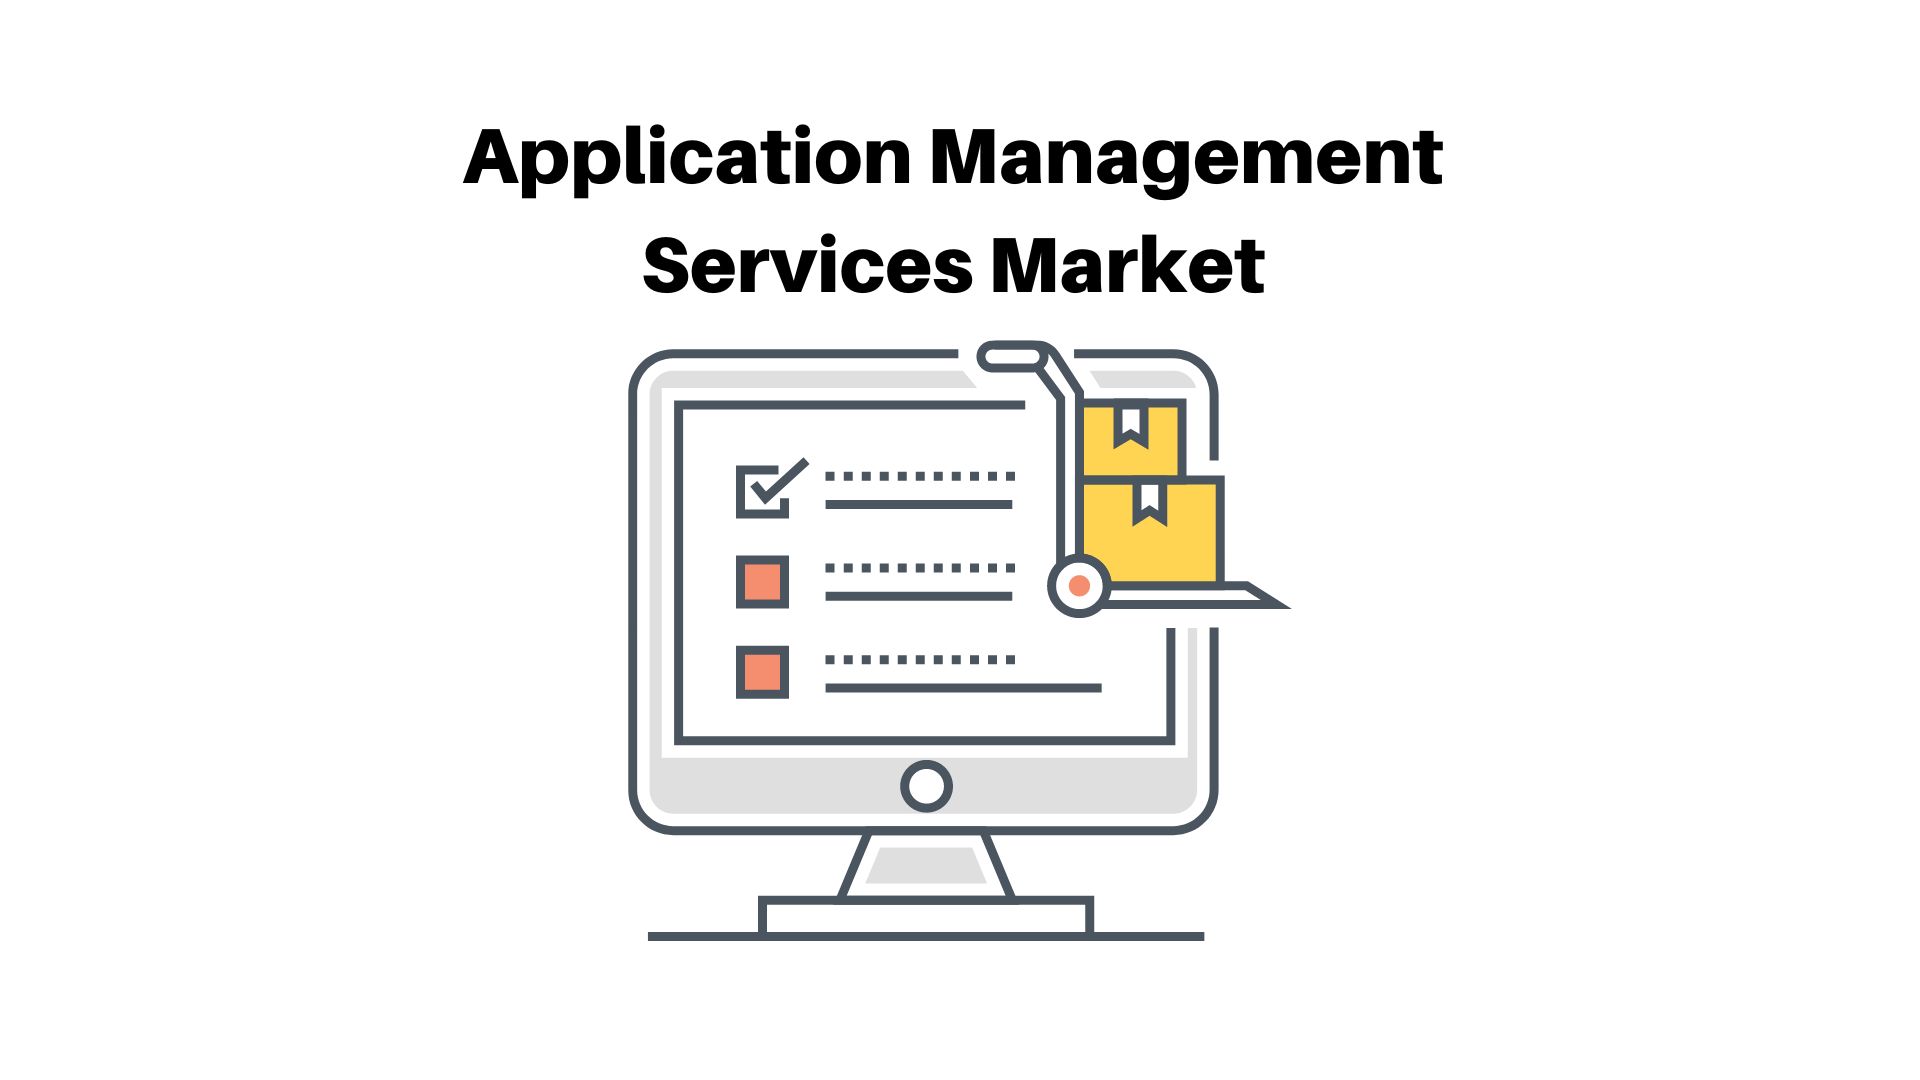 Application Management Services Market Will Grow Gradually At 22% CAGR Through The Forecast Period 2022-2032